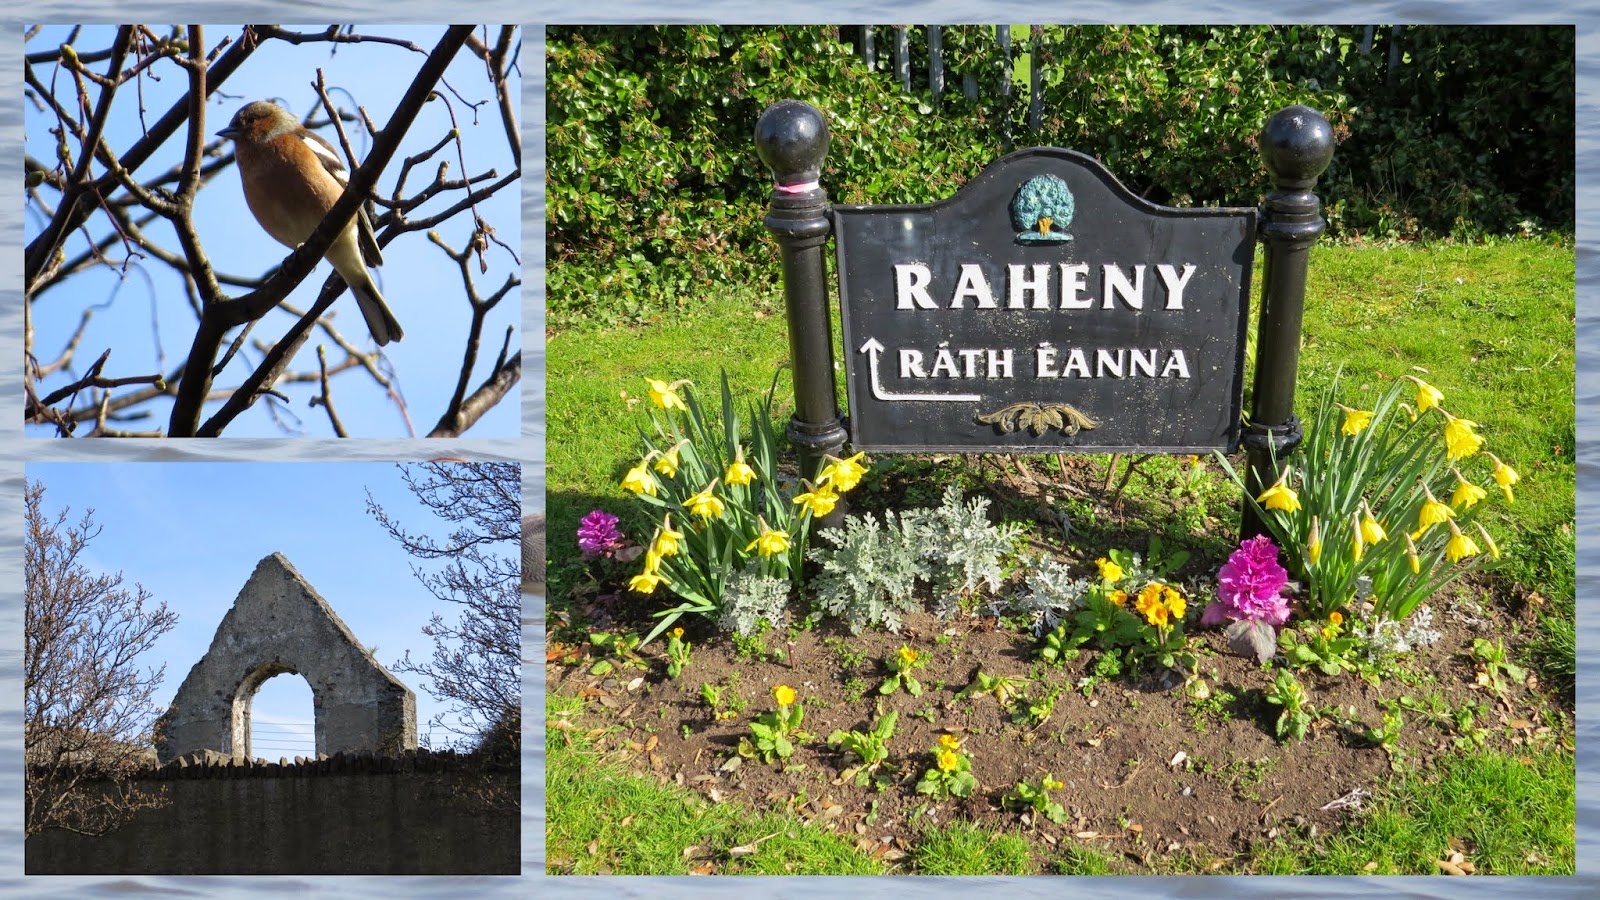 Chaffinch, old church wall and town sign in Raheny